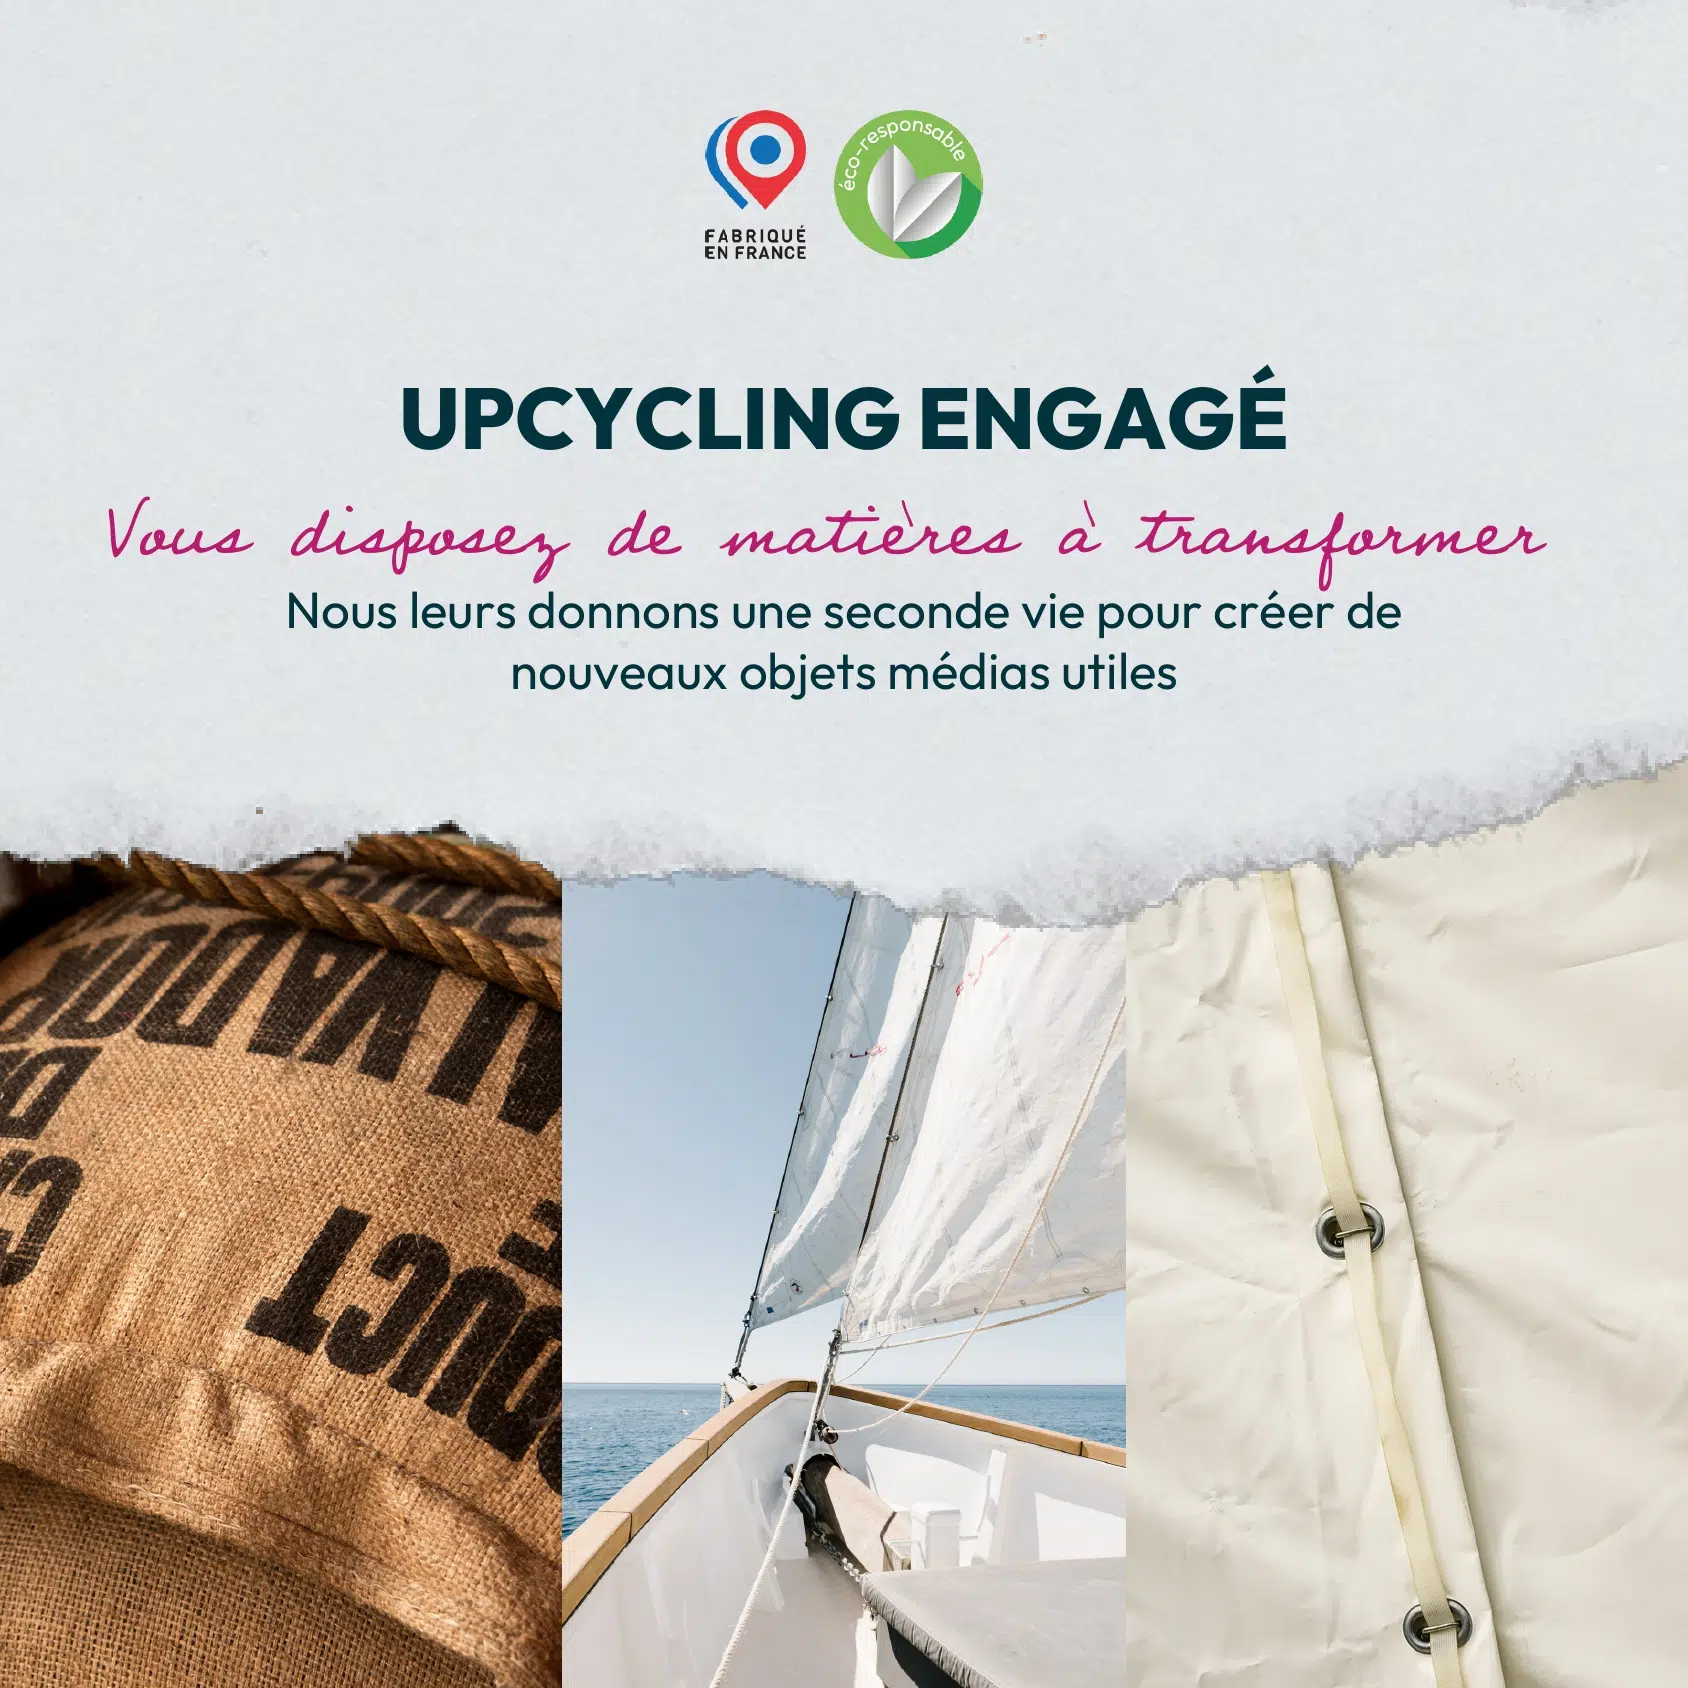 Upcycling engagé